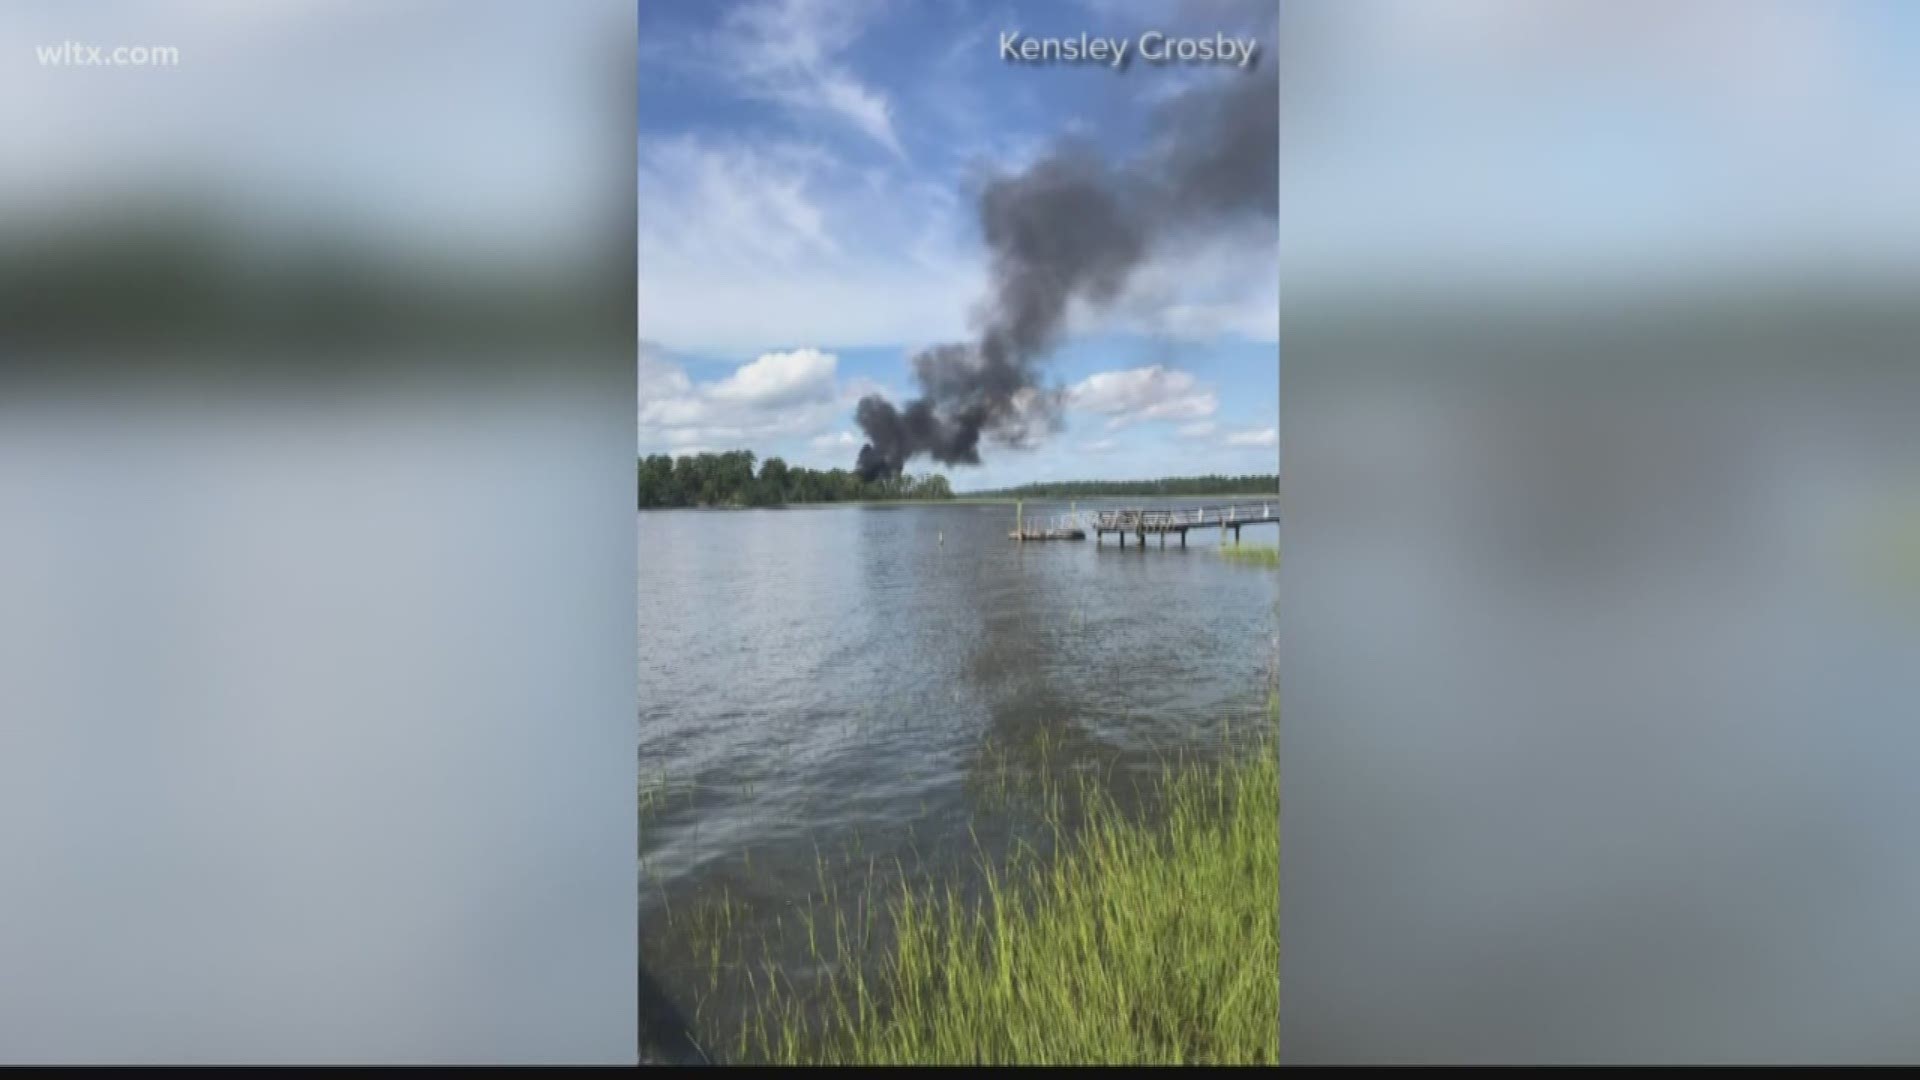 The Beaufort County Sheriff's office says the pilot is being evaluated for injuries.